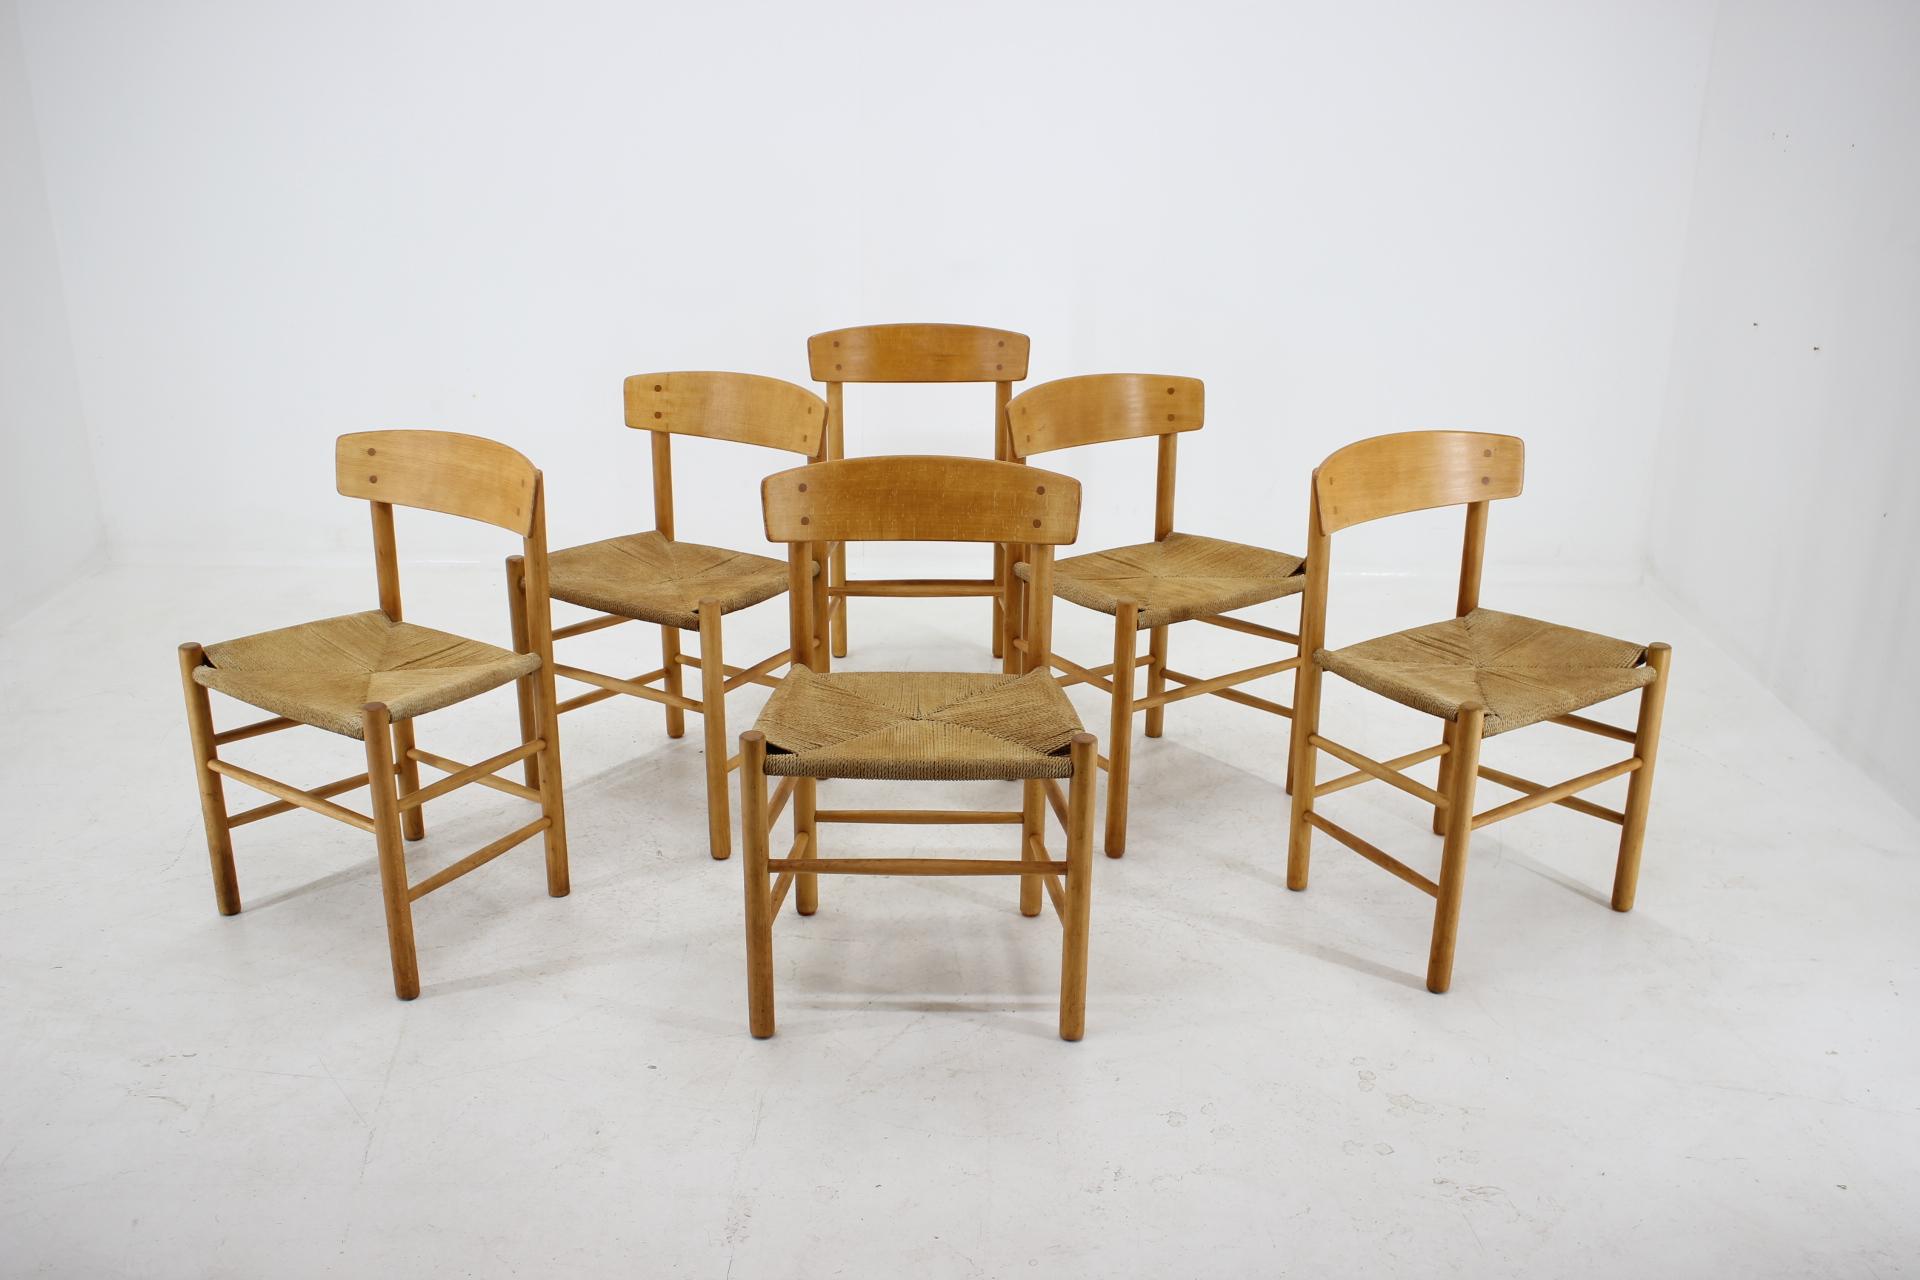 The frame of each one is made from stained beech wood and beech veneer. Partly renovated. The paper cord seats have some signs of use due to age.